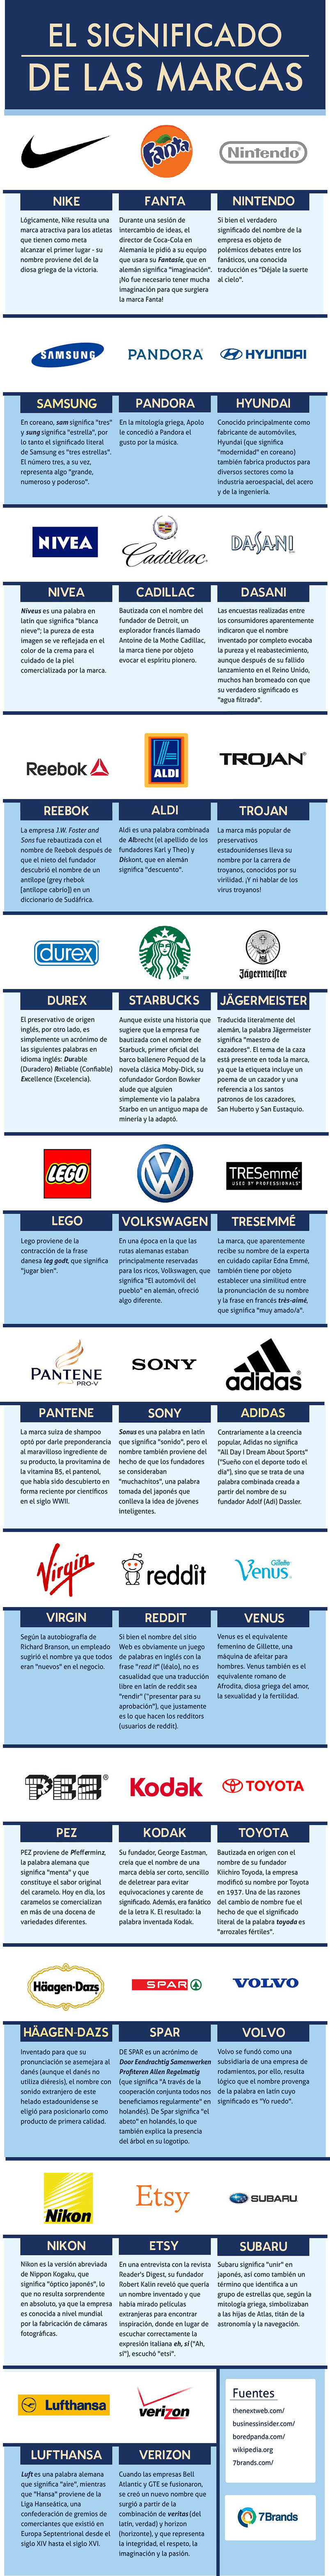 meaning of brand names_ES